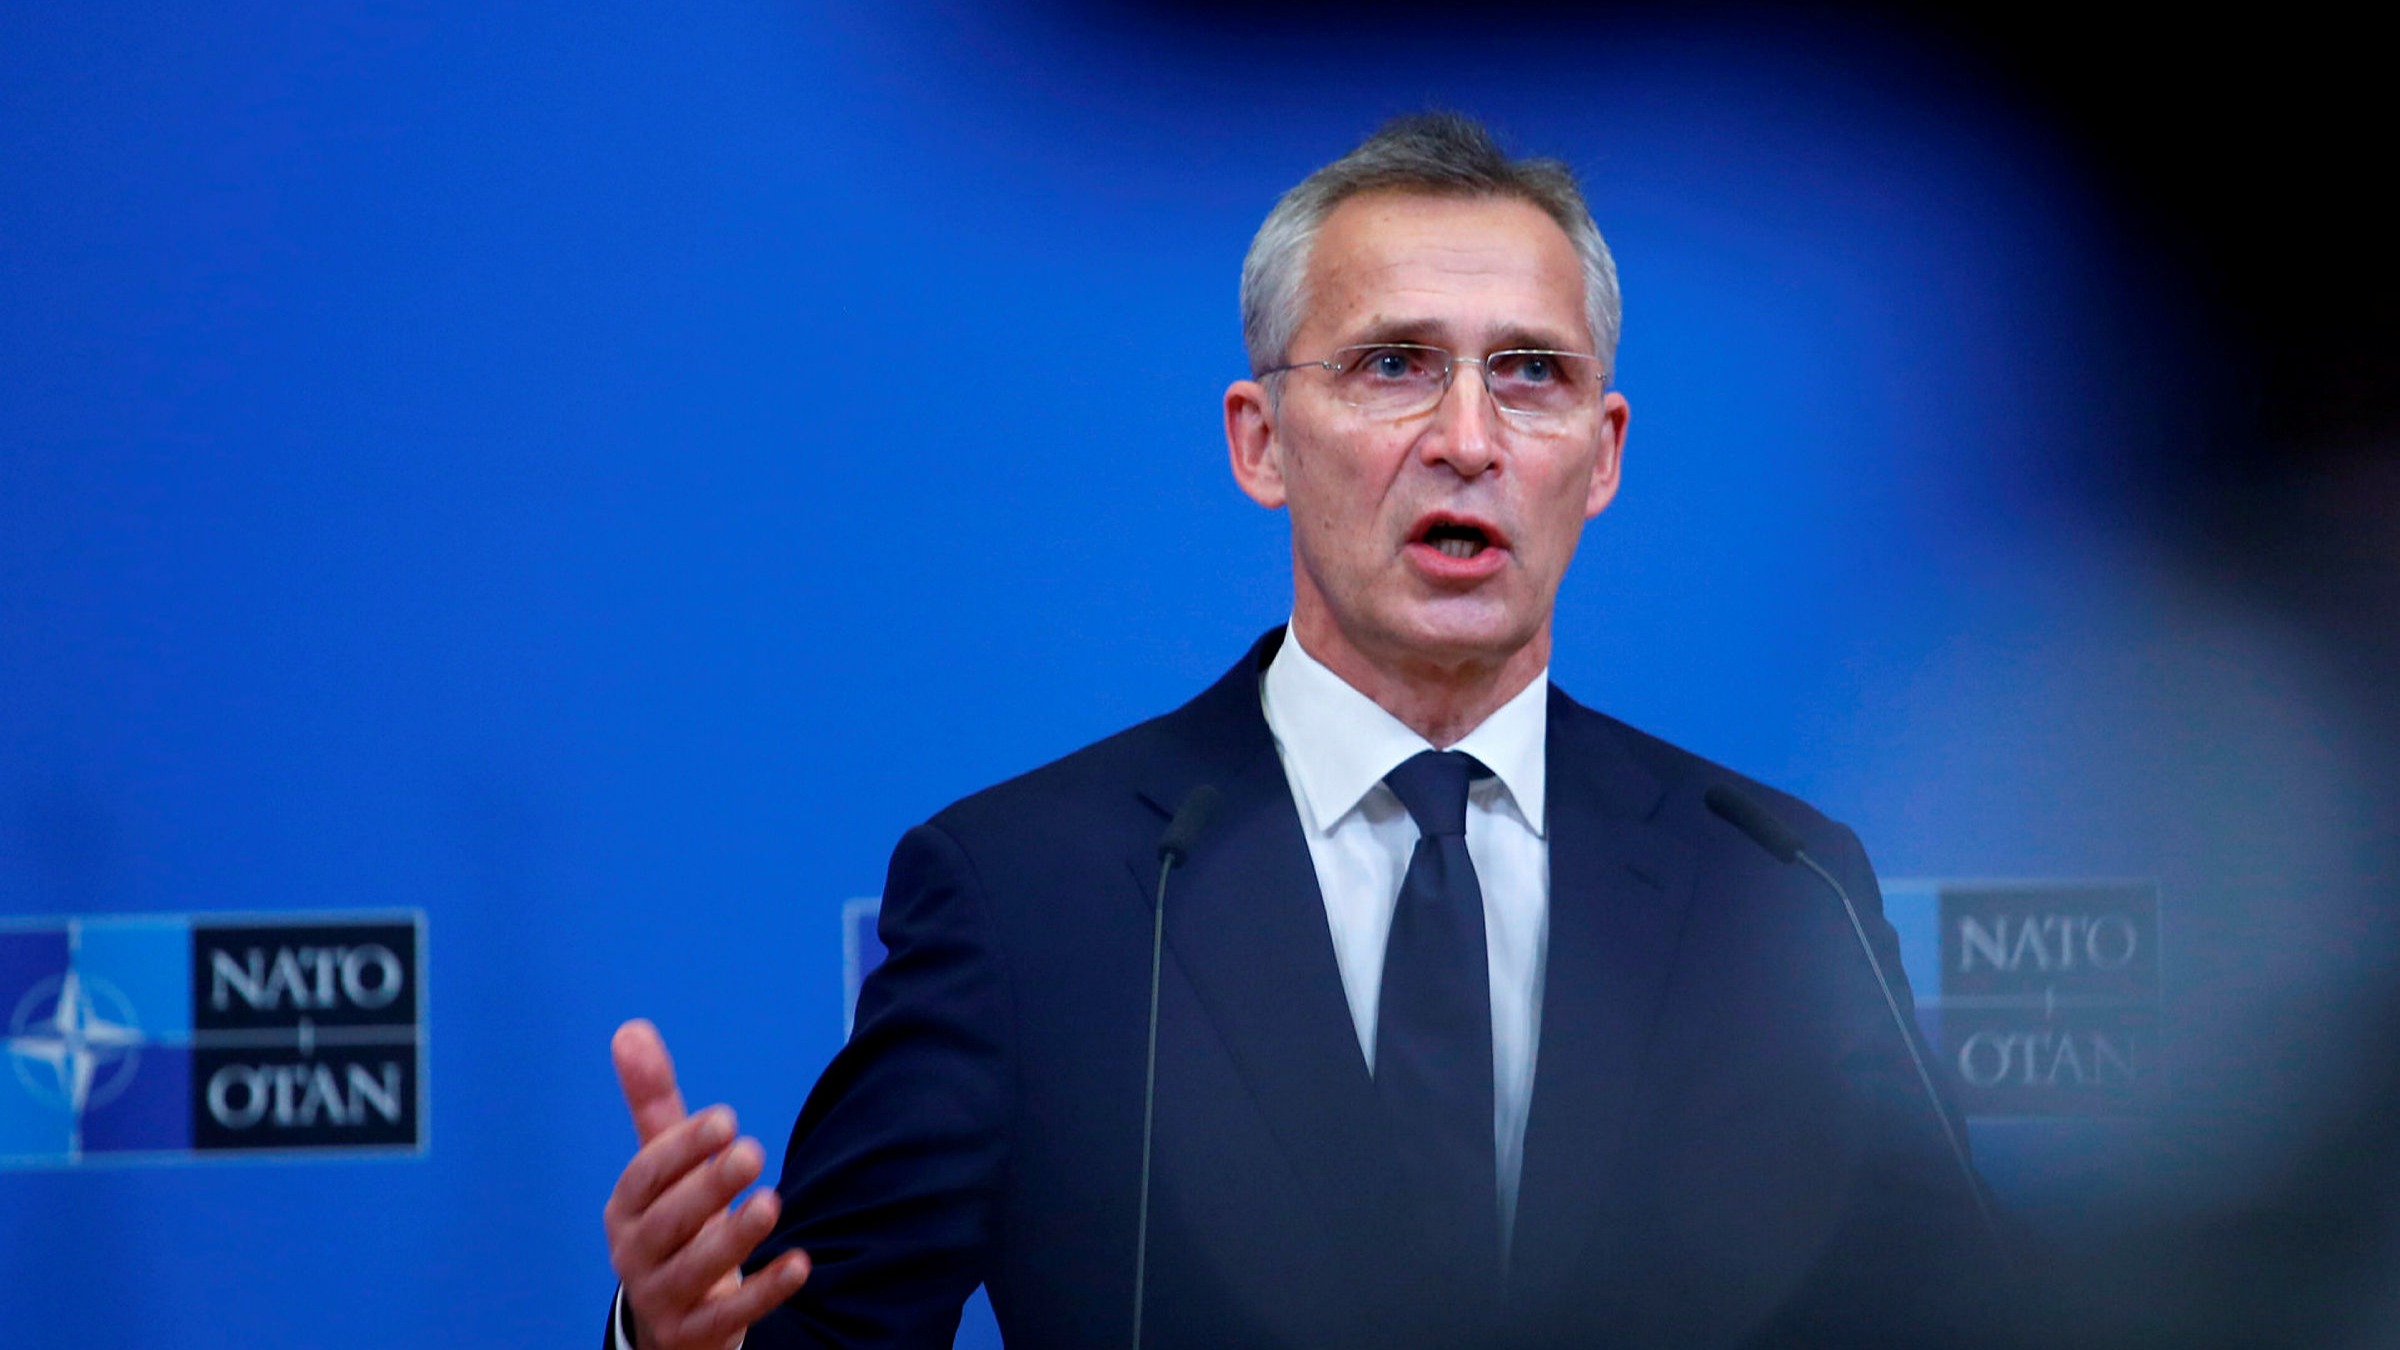 Nato chief Jens Stoltenberg seeks to head Norway's central bank | Financial  Times